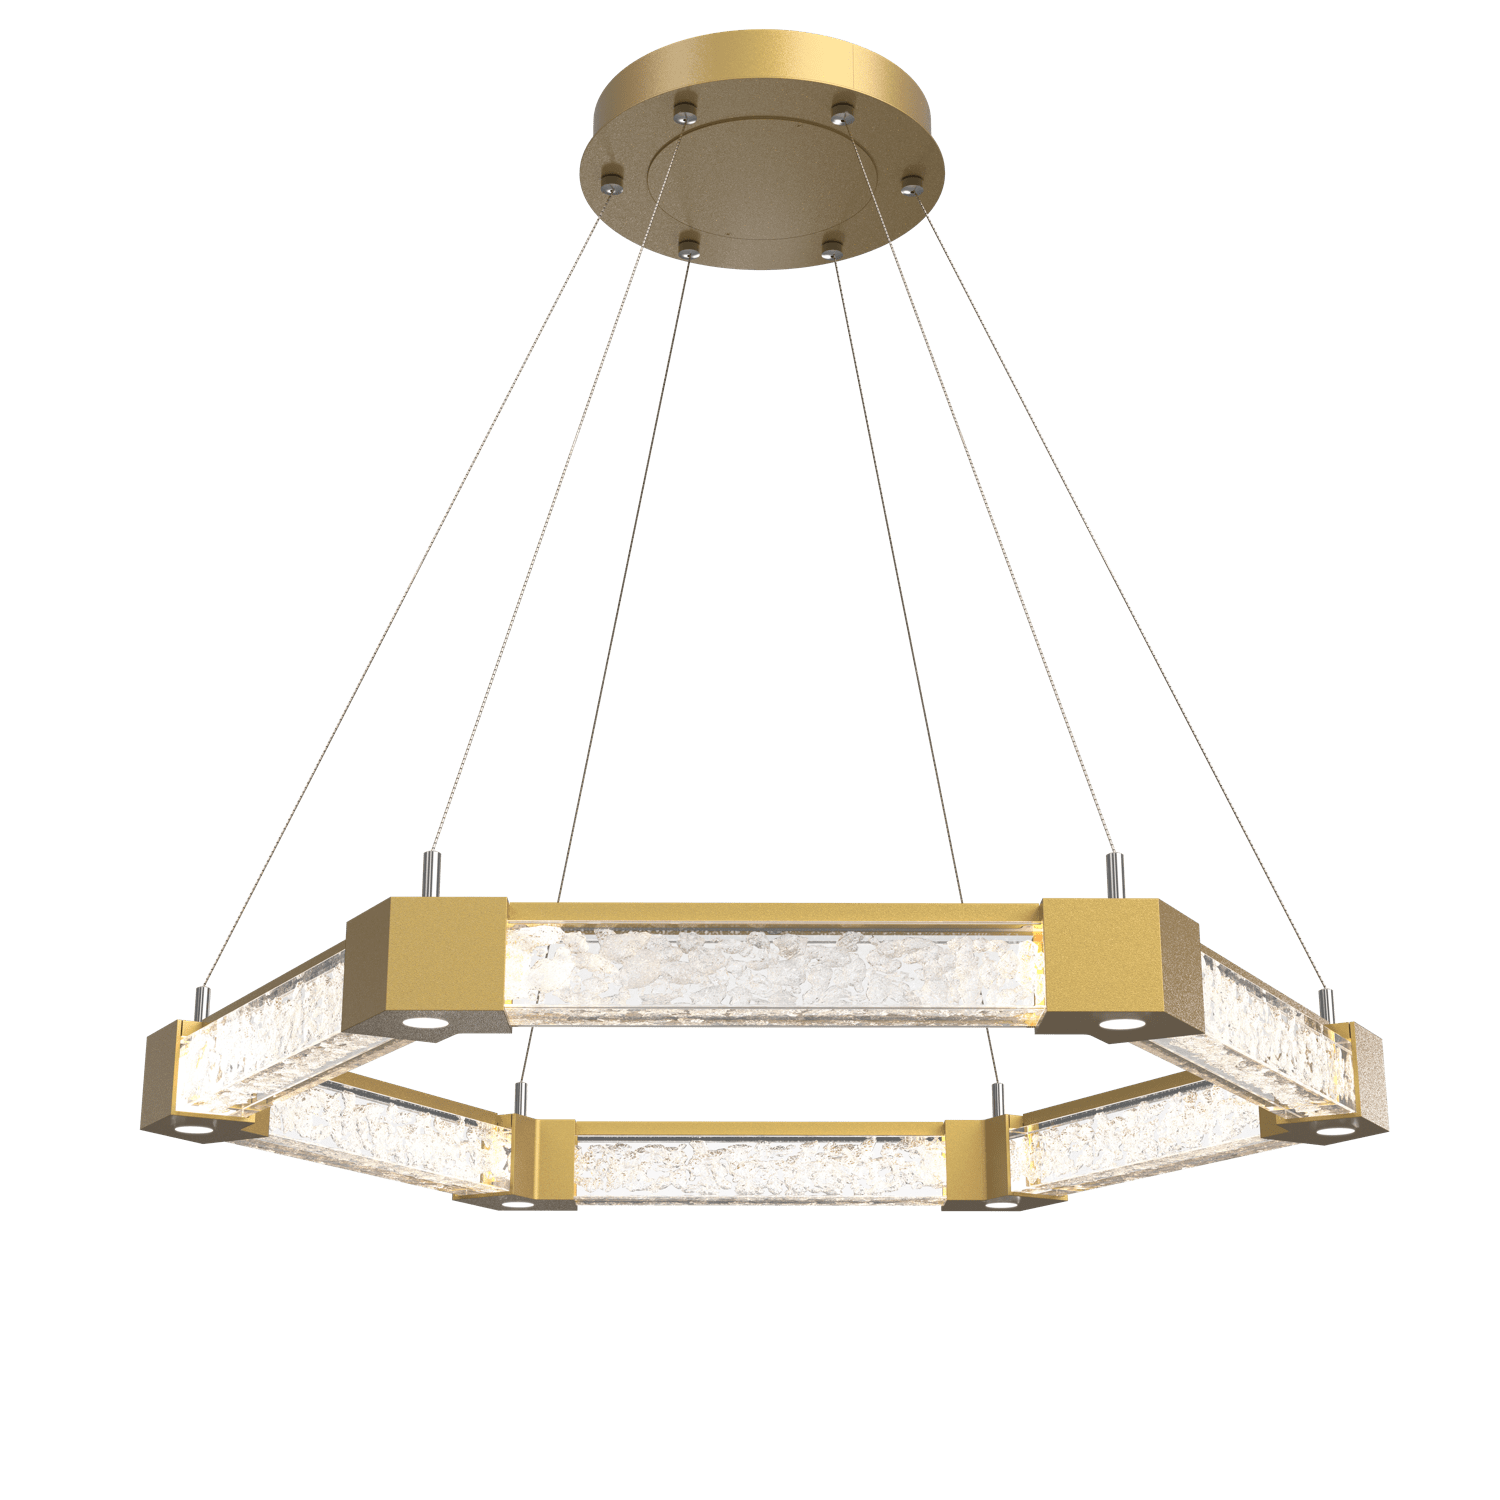 CHB0060-35-GB-GC-Hammerton-Studio-Axis-Hexagonal-Ring-Chandelier-with-Gilded-Brass-finish-and-clear-cast-glass-and-LED-lamping